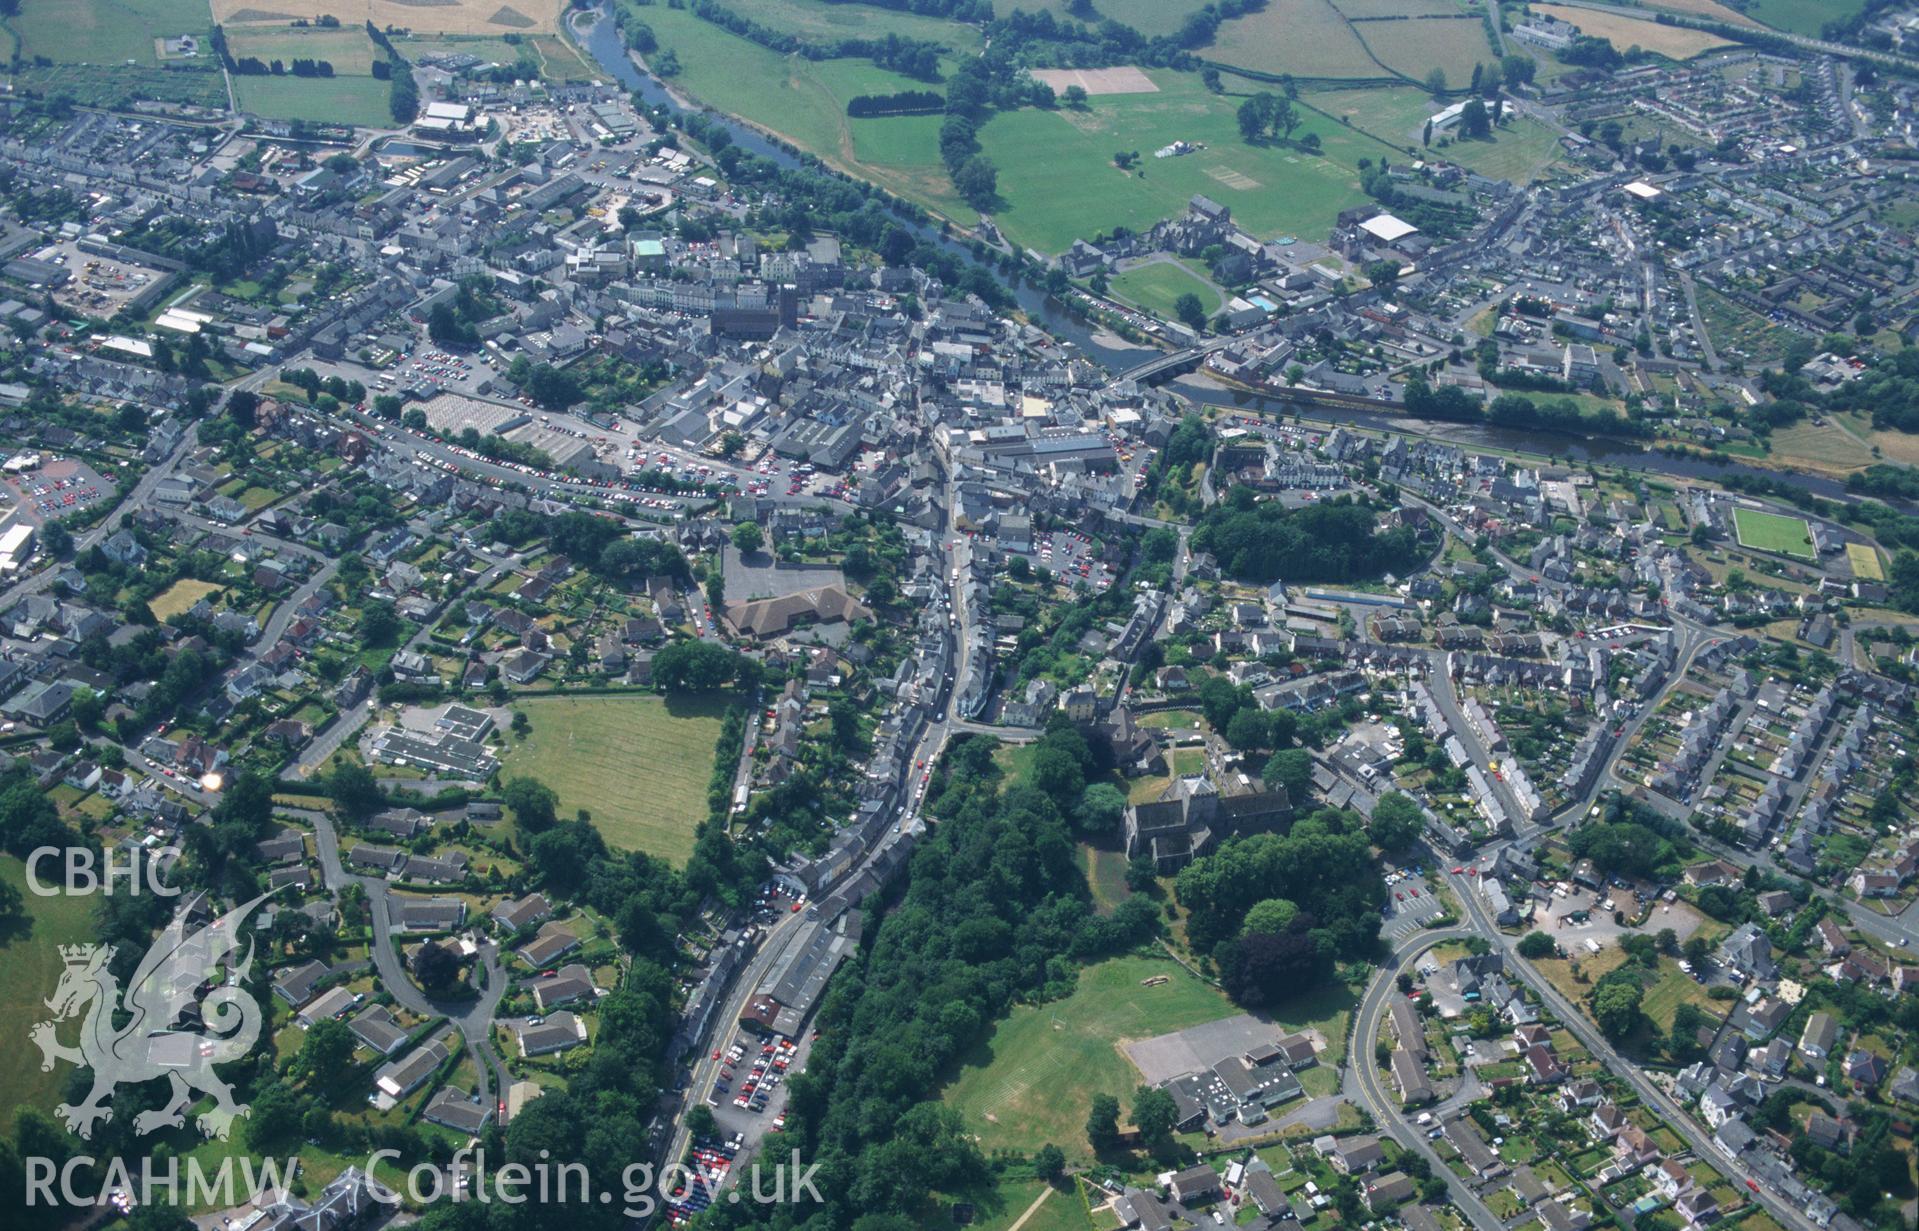 RCAHMW colour slide oblique aerial photograph of Brecon, taken by C.R.Musson on the 22/07/1996